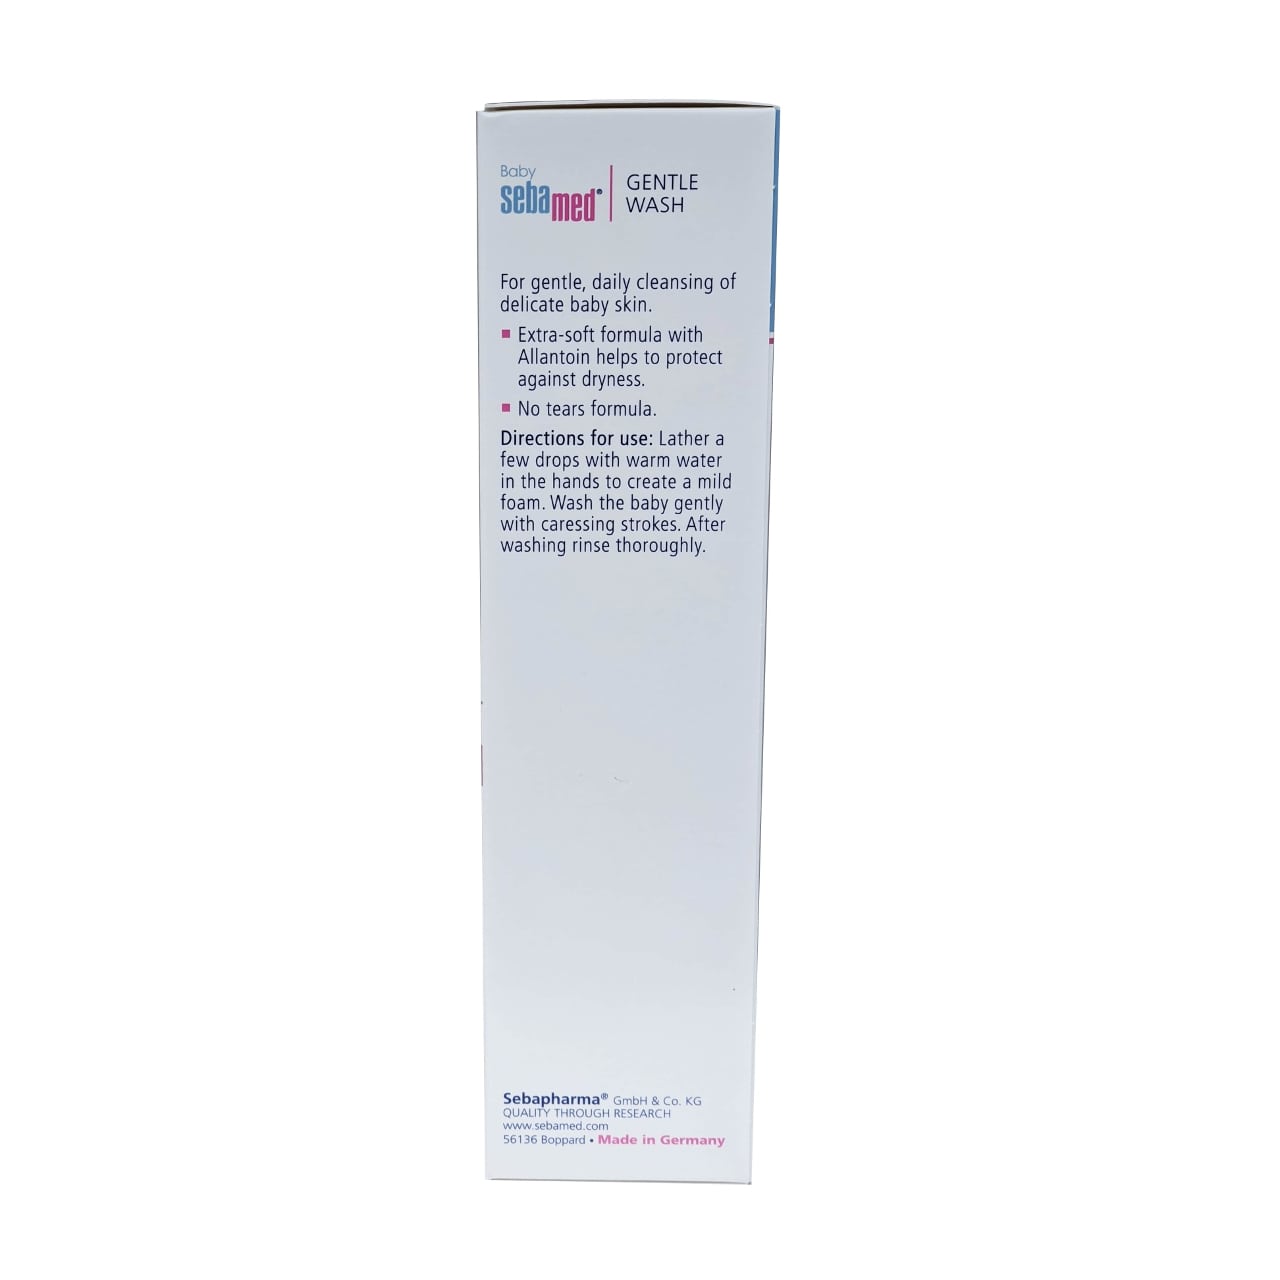 Product details for Baby Sebamed Gentle Wash for Delicate Skin with Allantoin 400 mL in English